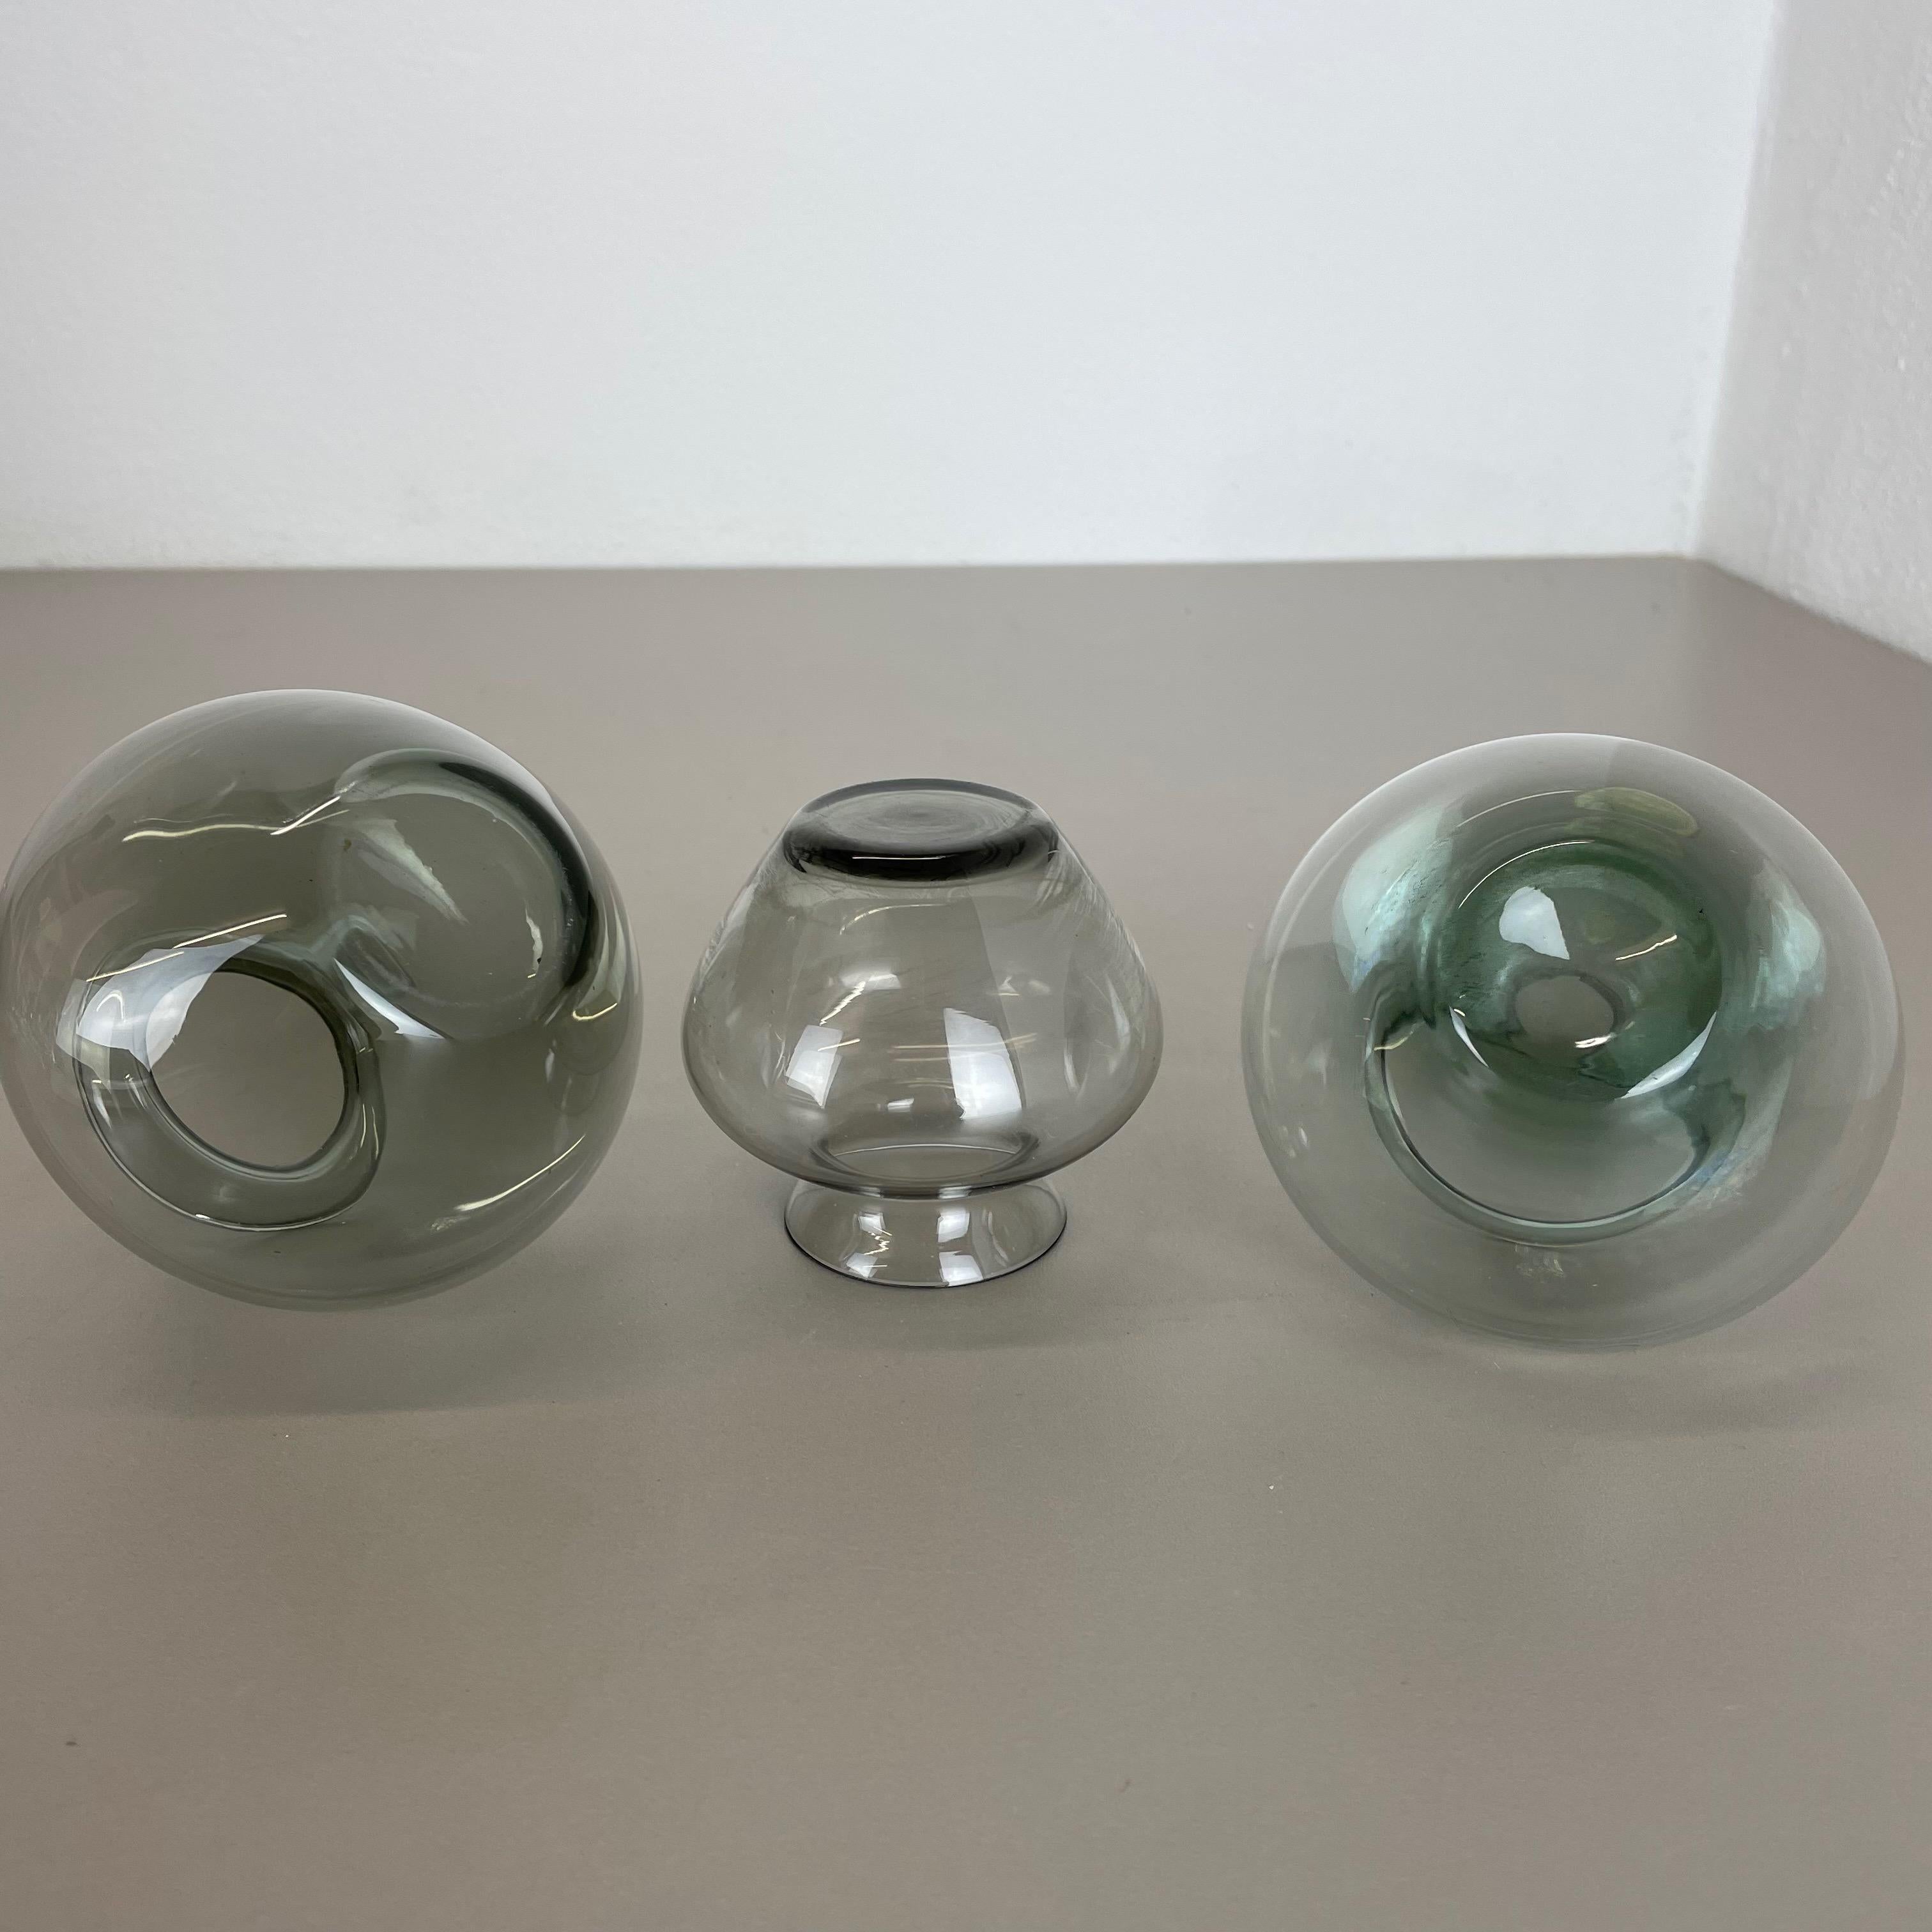 Set of Three Blue Green Tone Heart Vases by Wilhelm Wagenfeld for WMF, 1960s For Sale 9